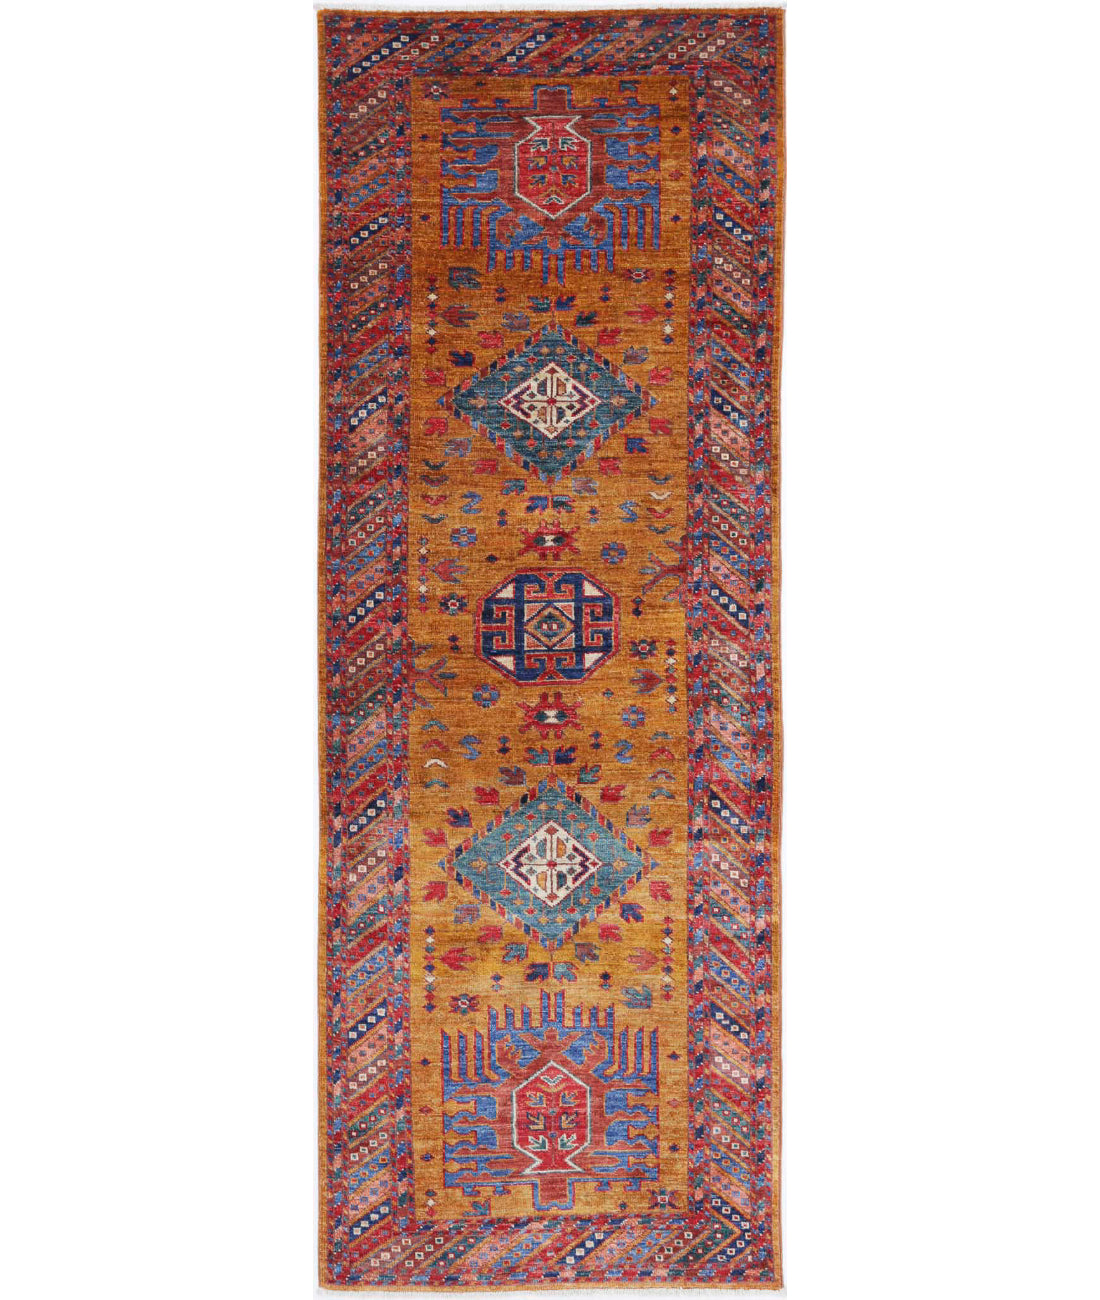 Hand Knotted Nomadic Caucasian Humna Wool Rug - 2&#39;8&#39;&#39; x 7&#39;7&#39;&#39; 2&#39;8&#39;&#39; x 7&#39;7&#39;&#39; (80 X 228) / Gold / Multi